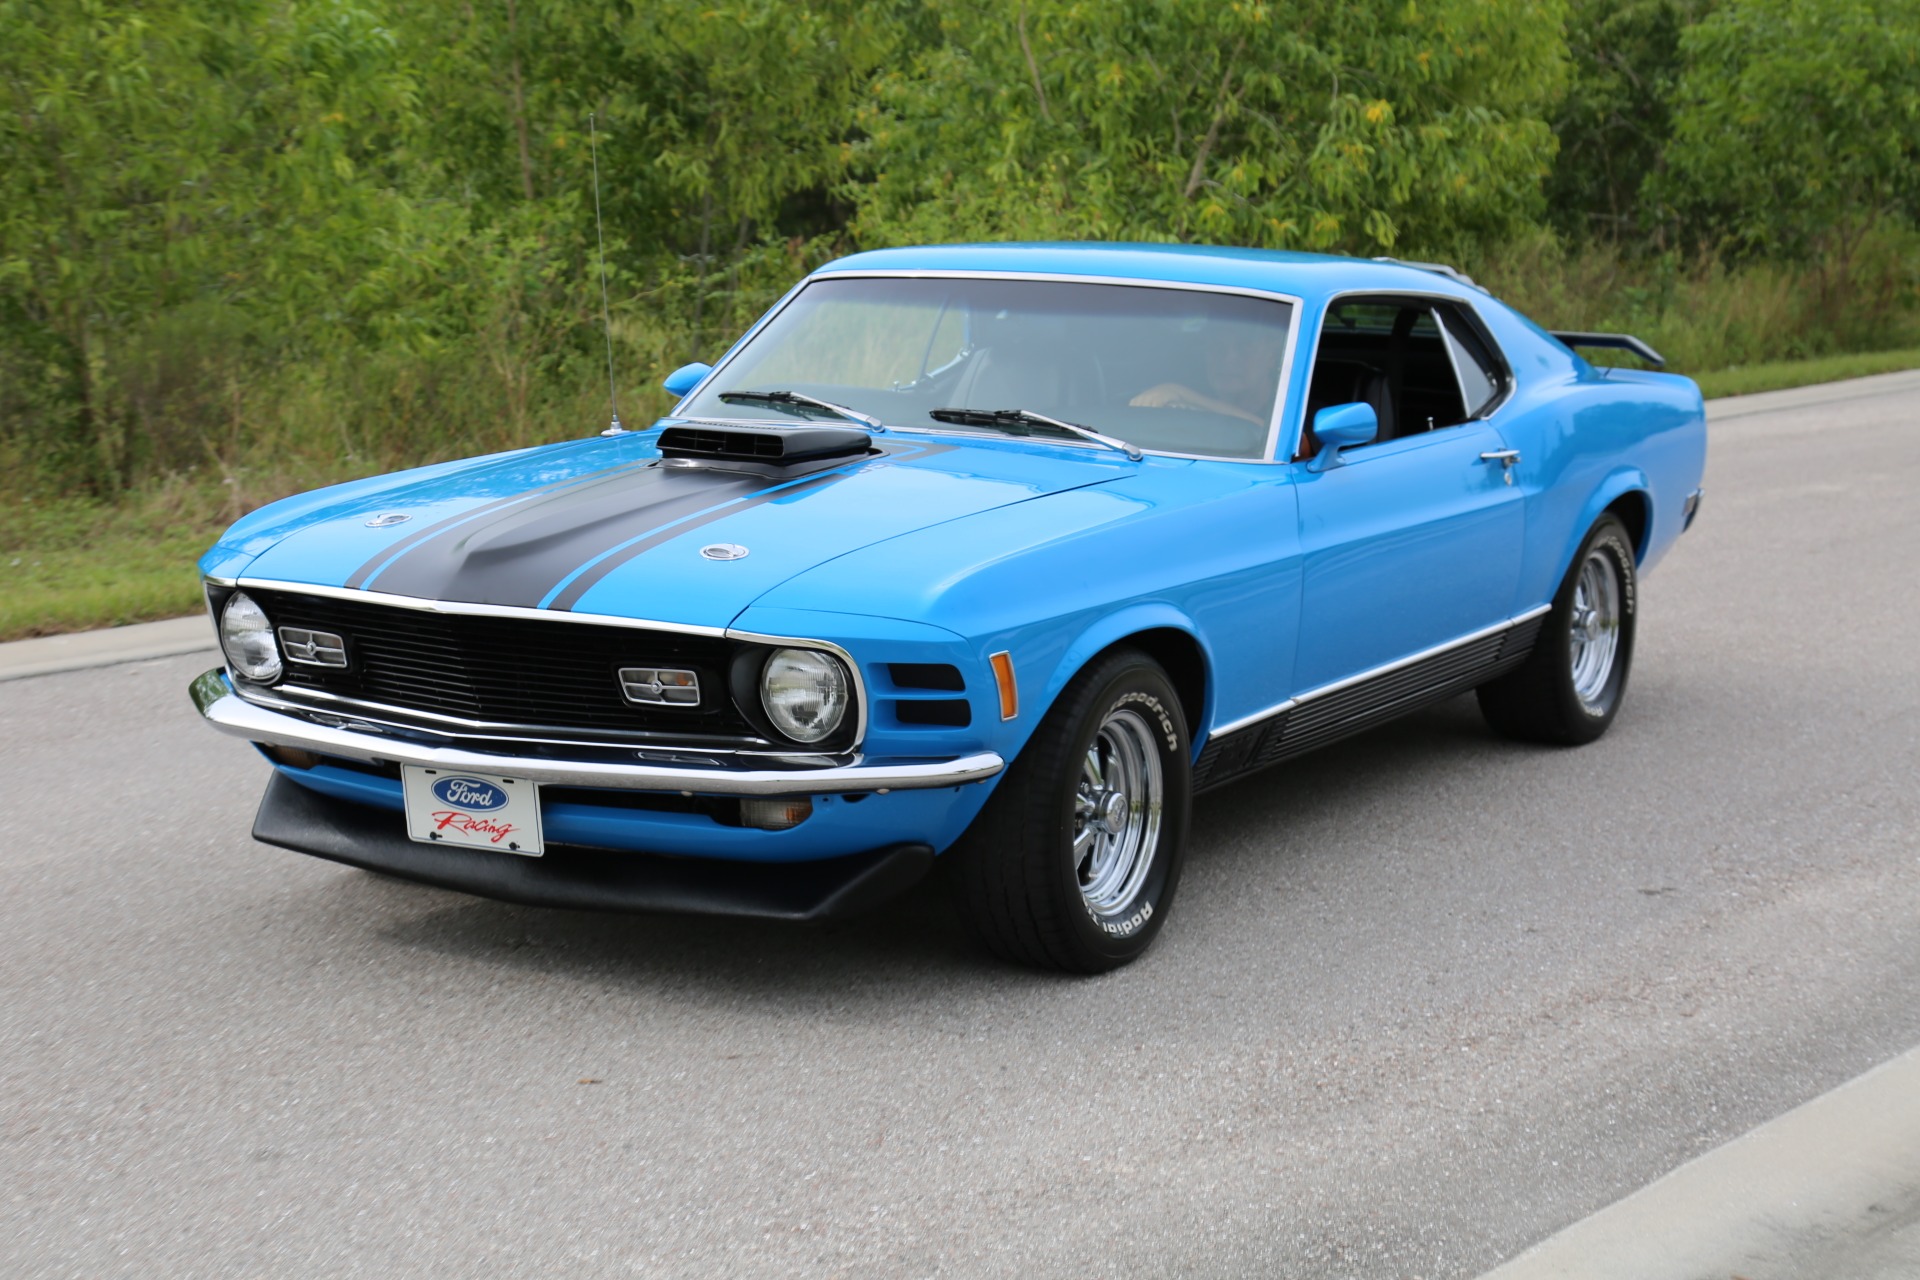 Used 1970 Ford Mustang Mach 1 For Sale ($33,000) | Muscle Cars for Sale ...